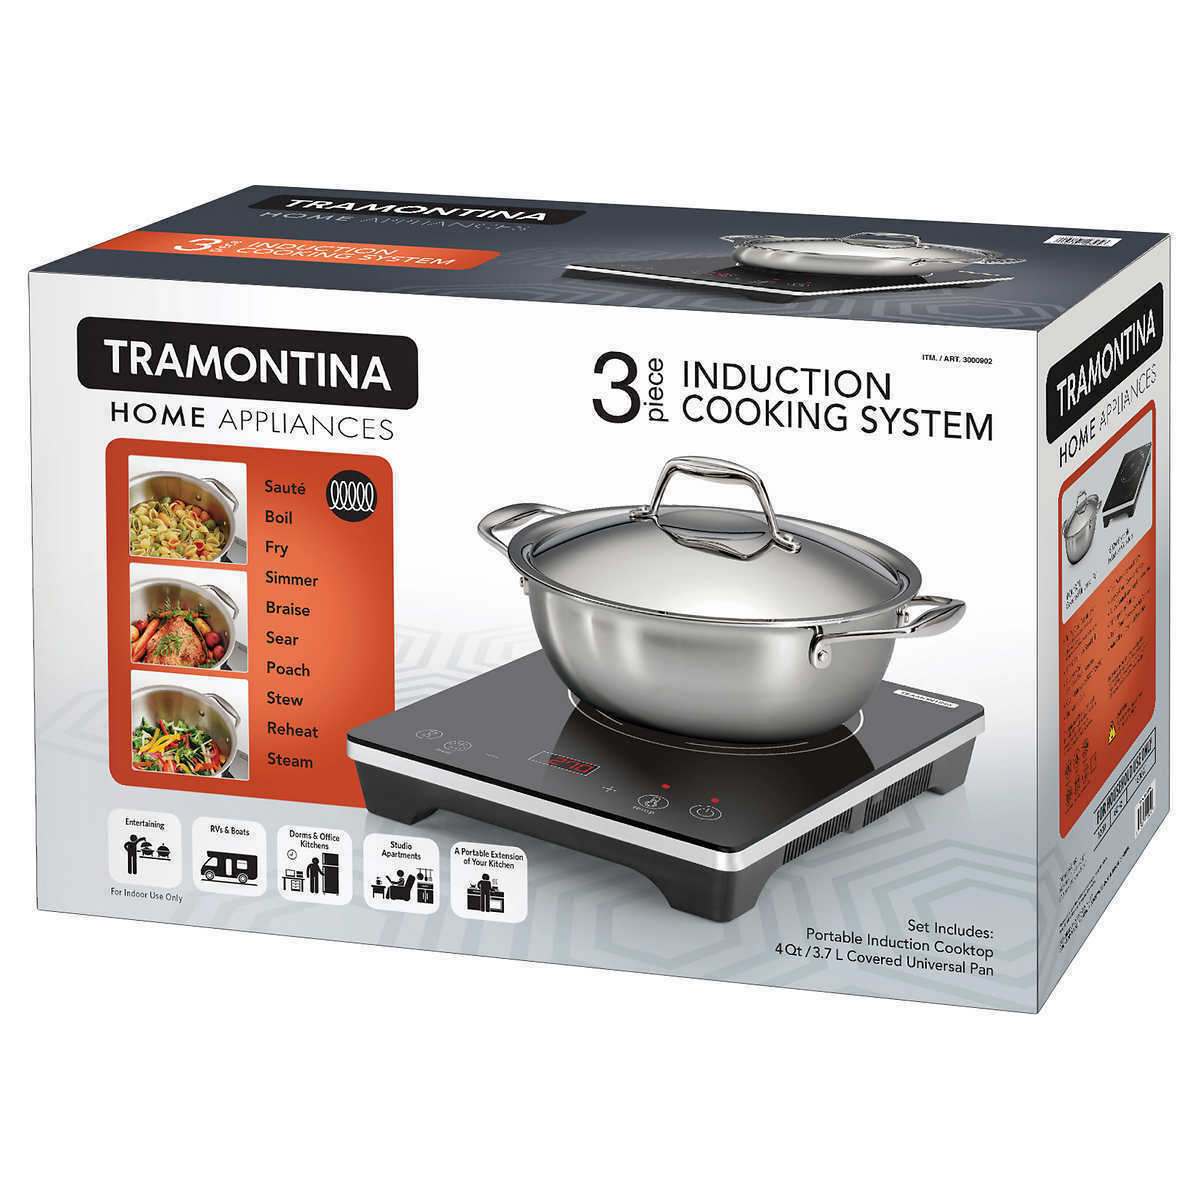 10 Best Tramontina Induction Cooktop For 2023 1691815032 